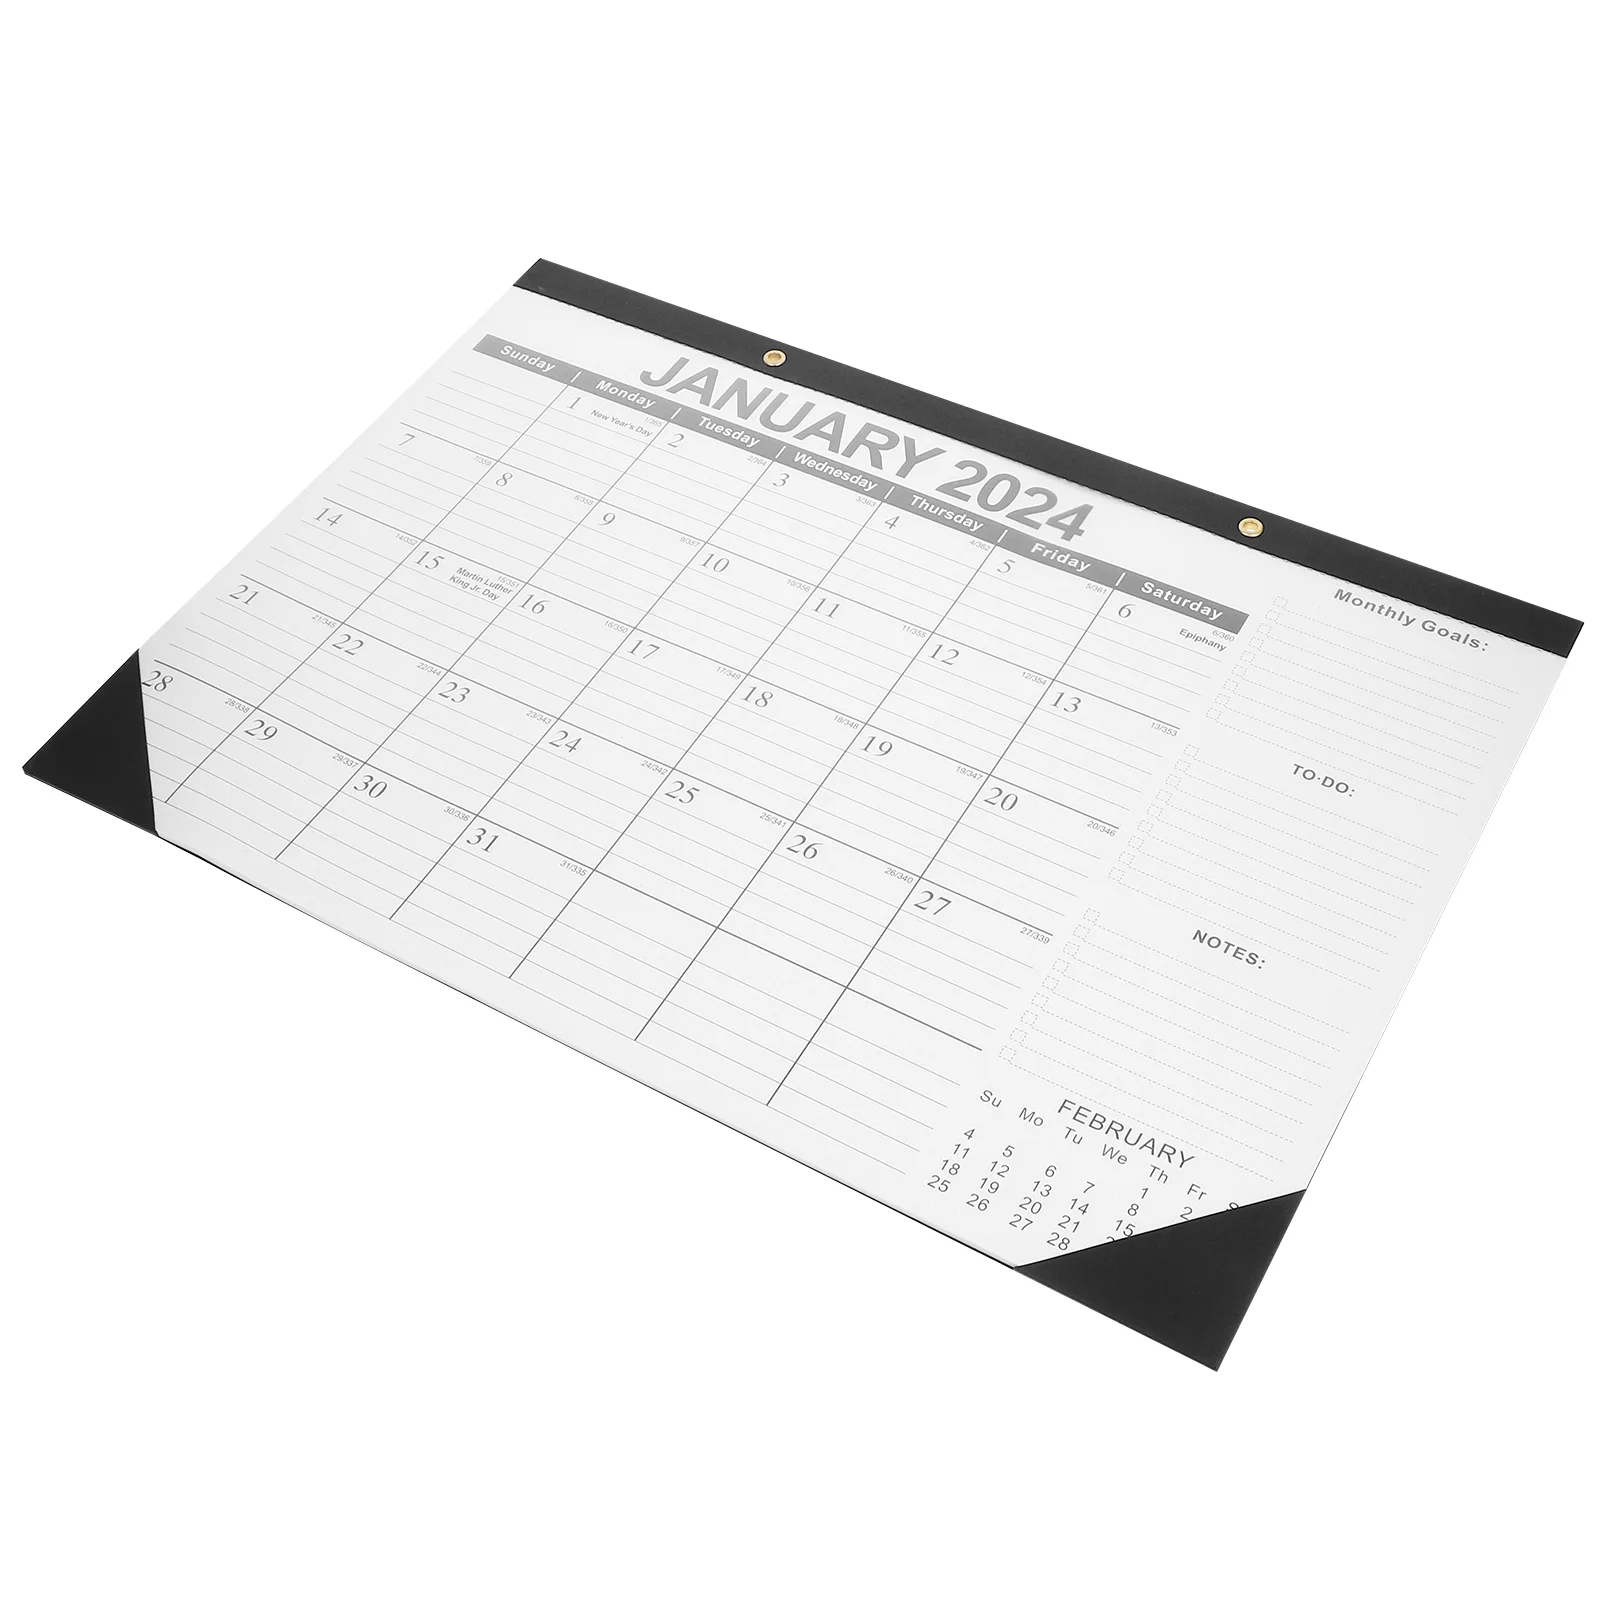 

Office Calendar English Hanging Calendar Simple Desk Calendar American Holiday Household Planning Monthly Home Accessory